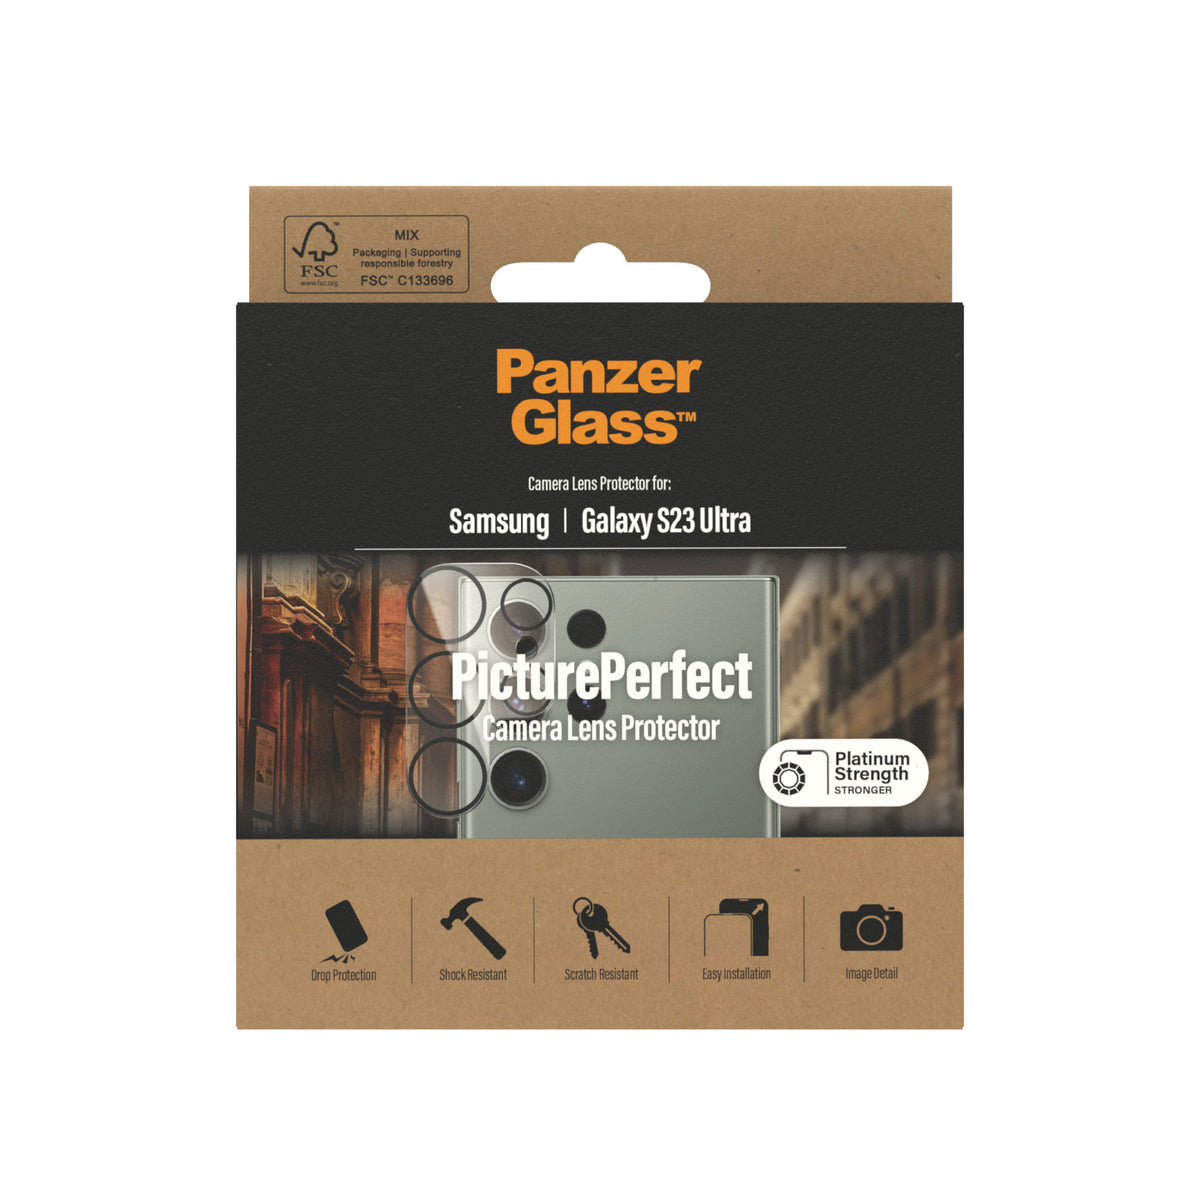 PANZERGLASS Camera Lens Protector for Samsung Galaxy S23 Ultra - Clear